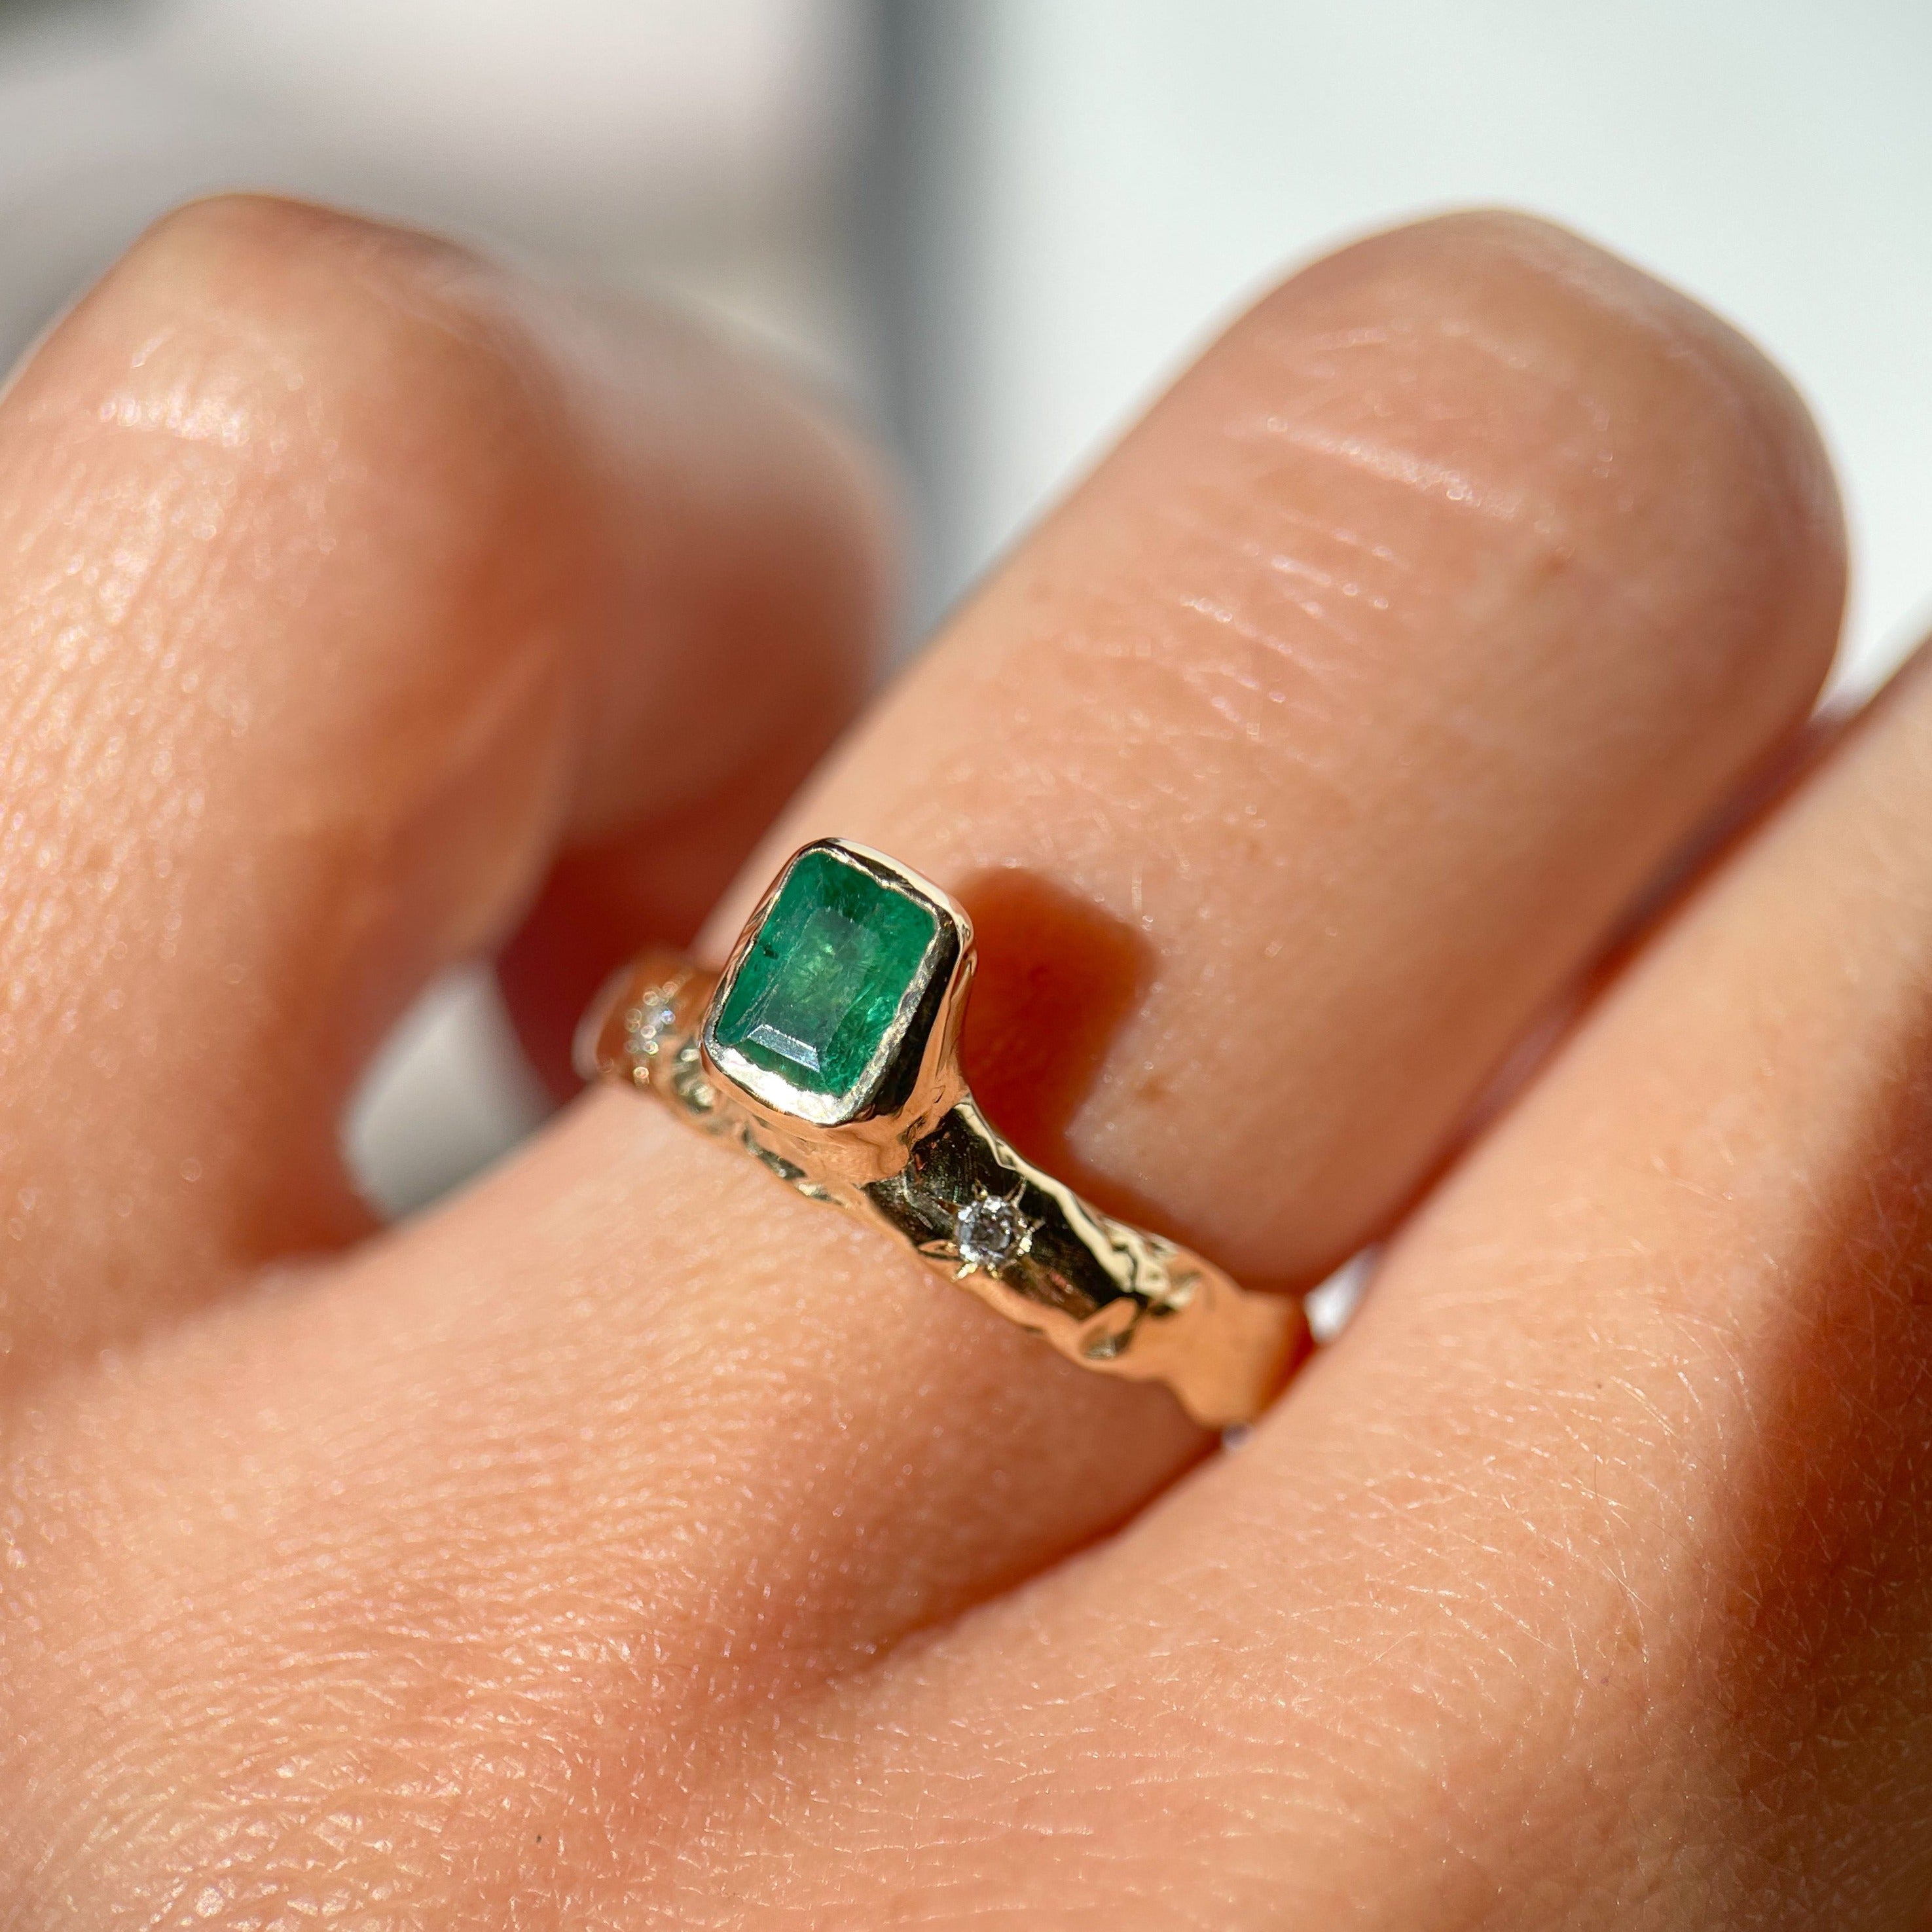 An emerald cut  emerald is bezel set in 14k gold  on a wide band with two star set diamonds on the side of the main stone.